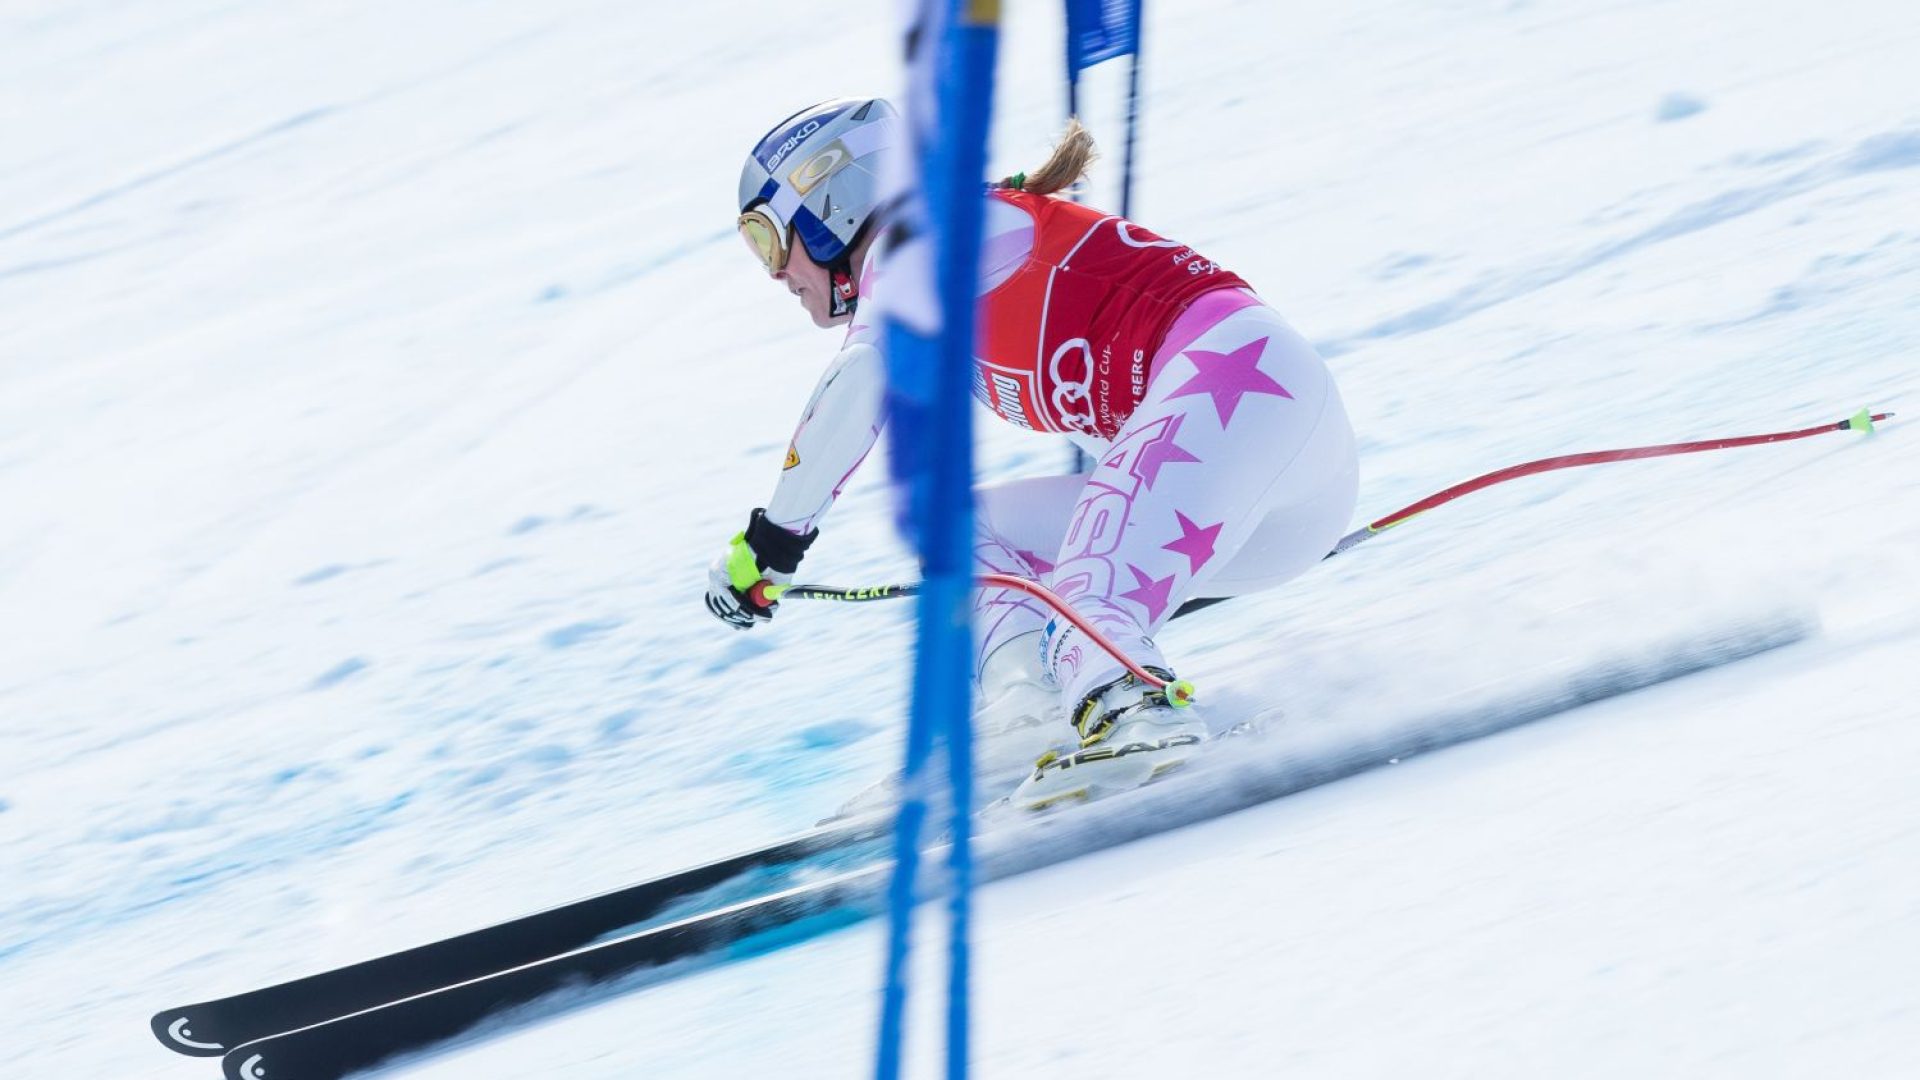 lindsey-tore-down-the-super-g-course-in-st-anton